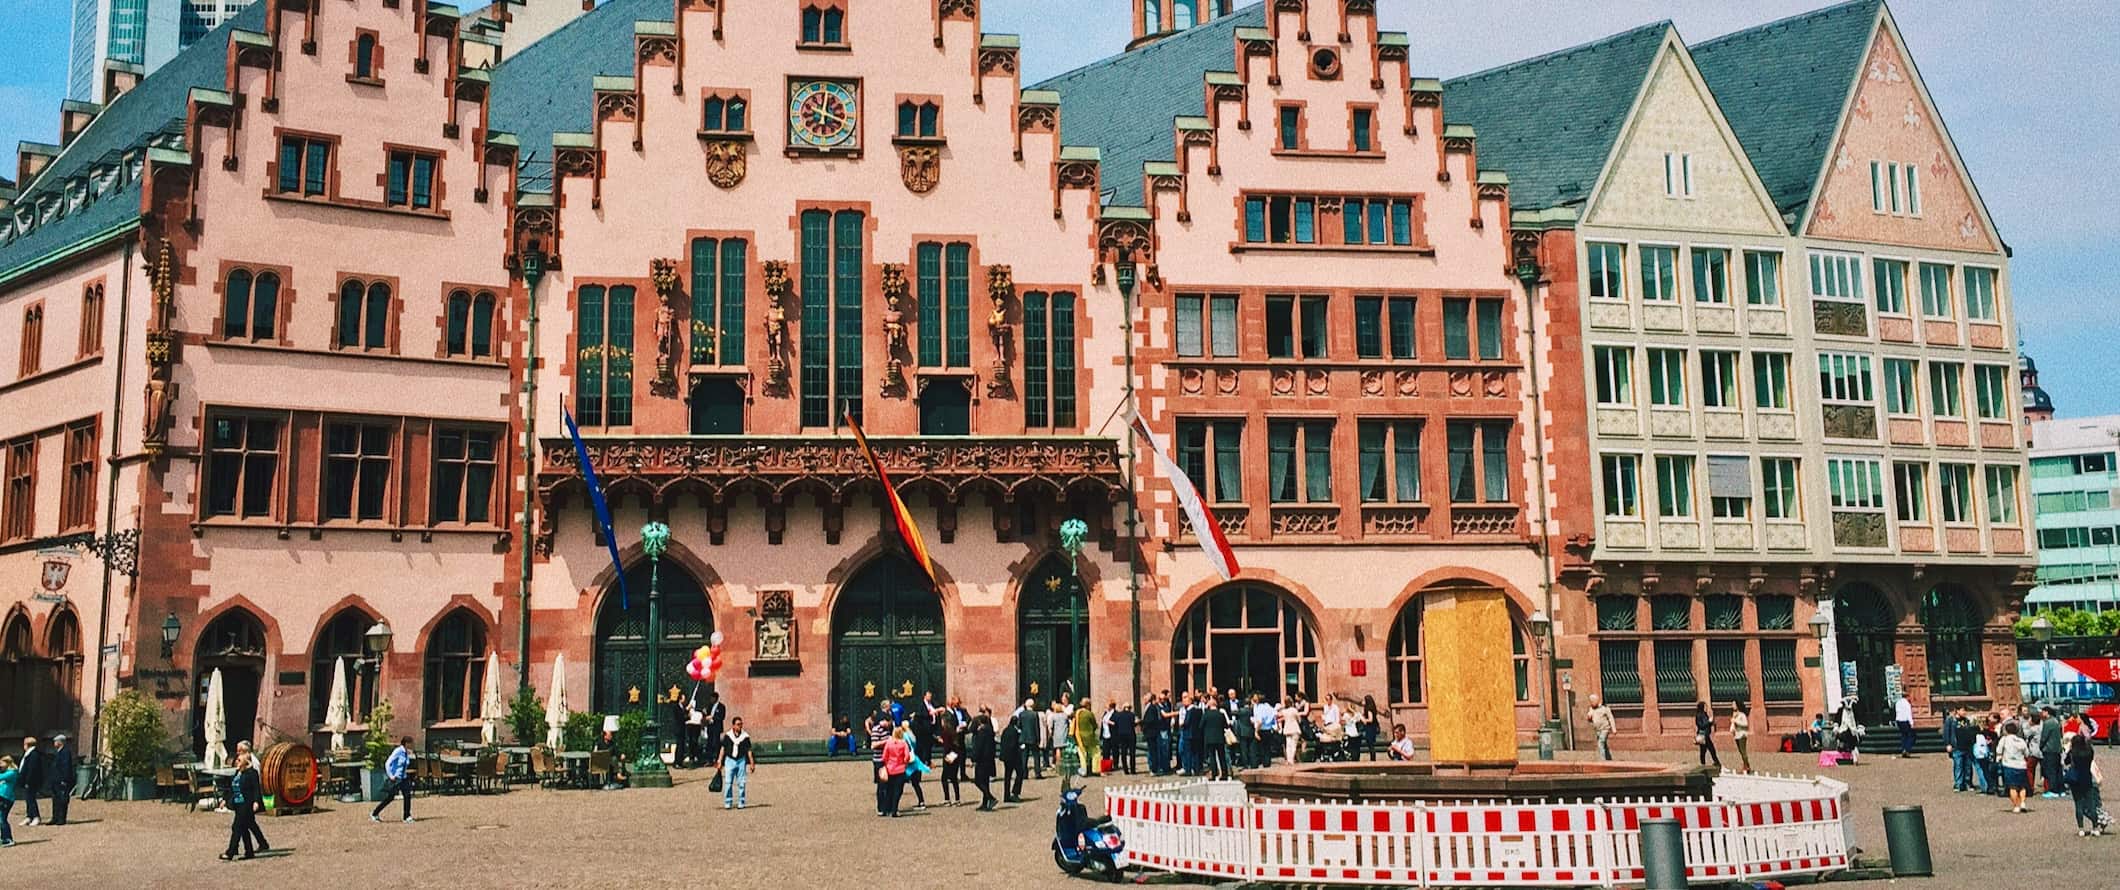 Colorful old buildings lining a square in Frankfurt, Germany